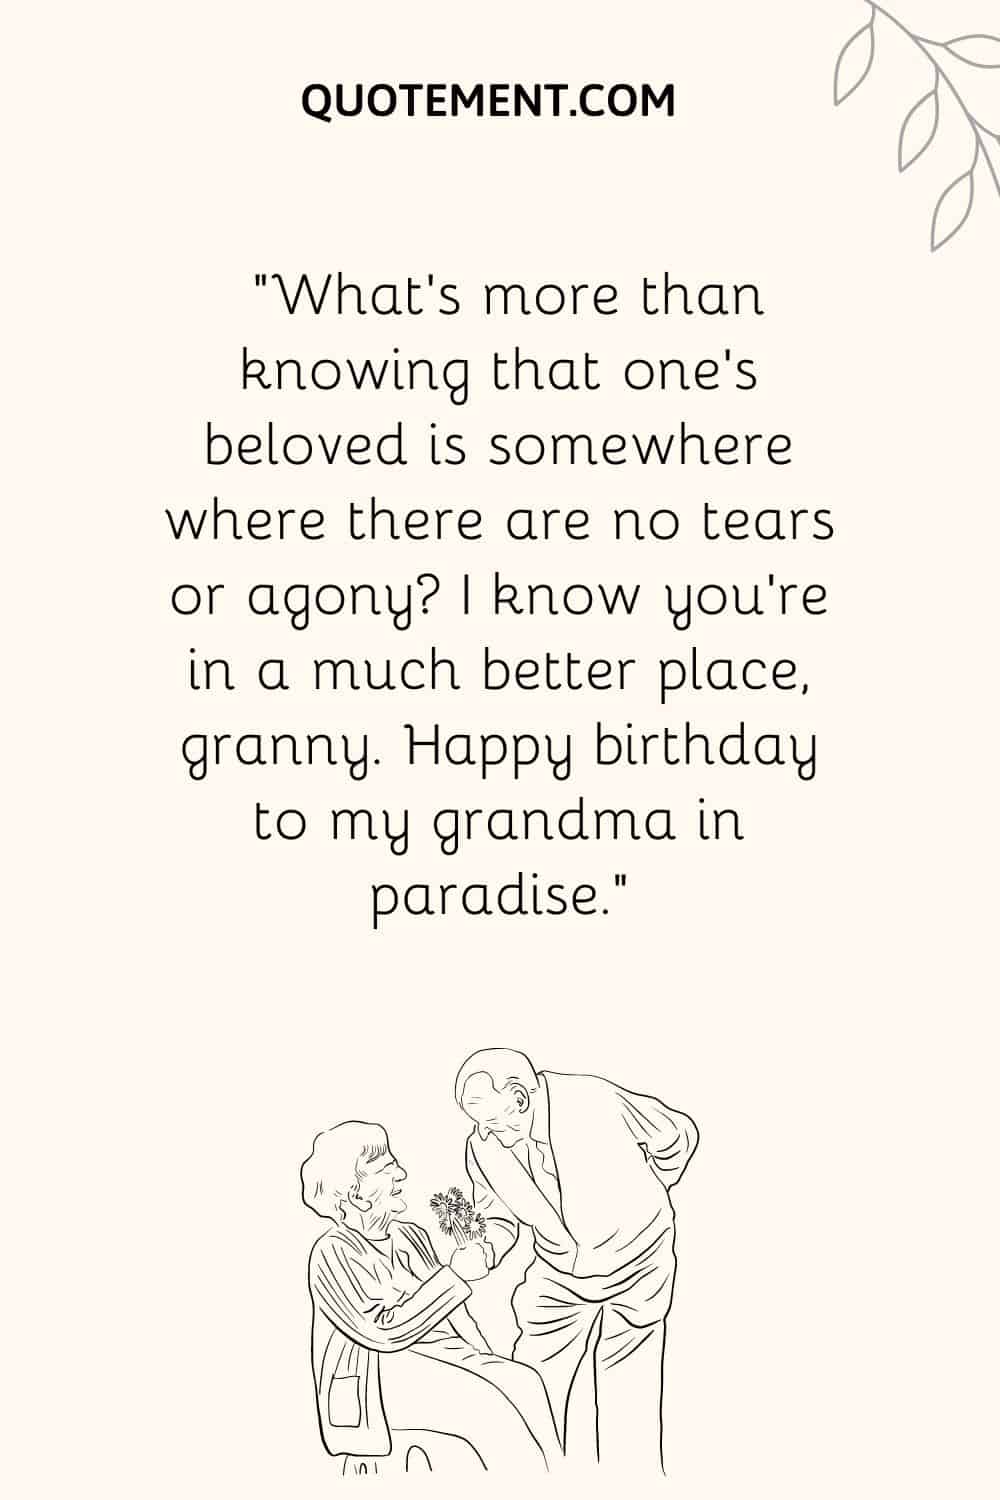 “What’s more than knowing that one’s beloved is somewhere where there are no tears or agony I know you’re in a much better place, granny. Happy birthday to my grandma in paradise.”